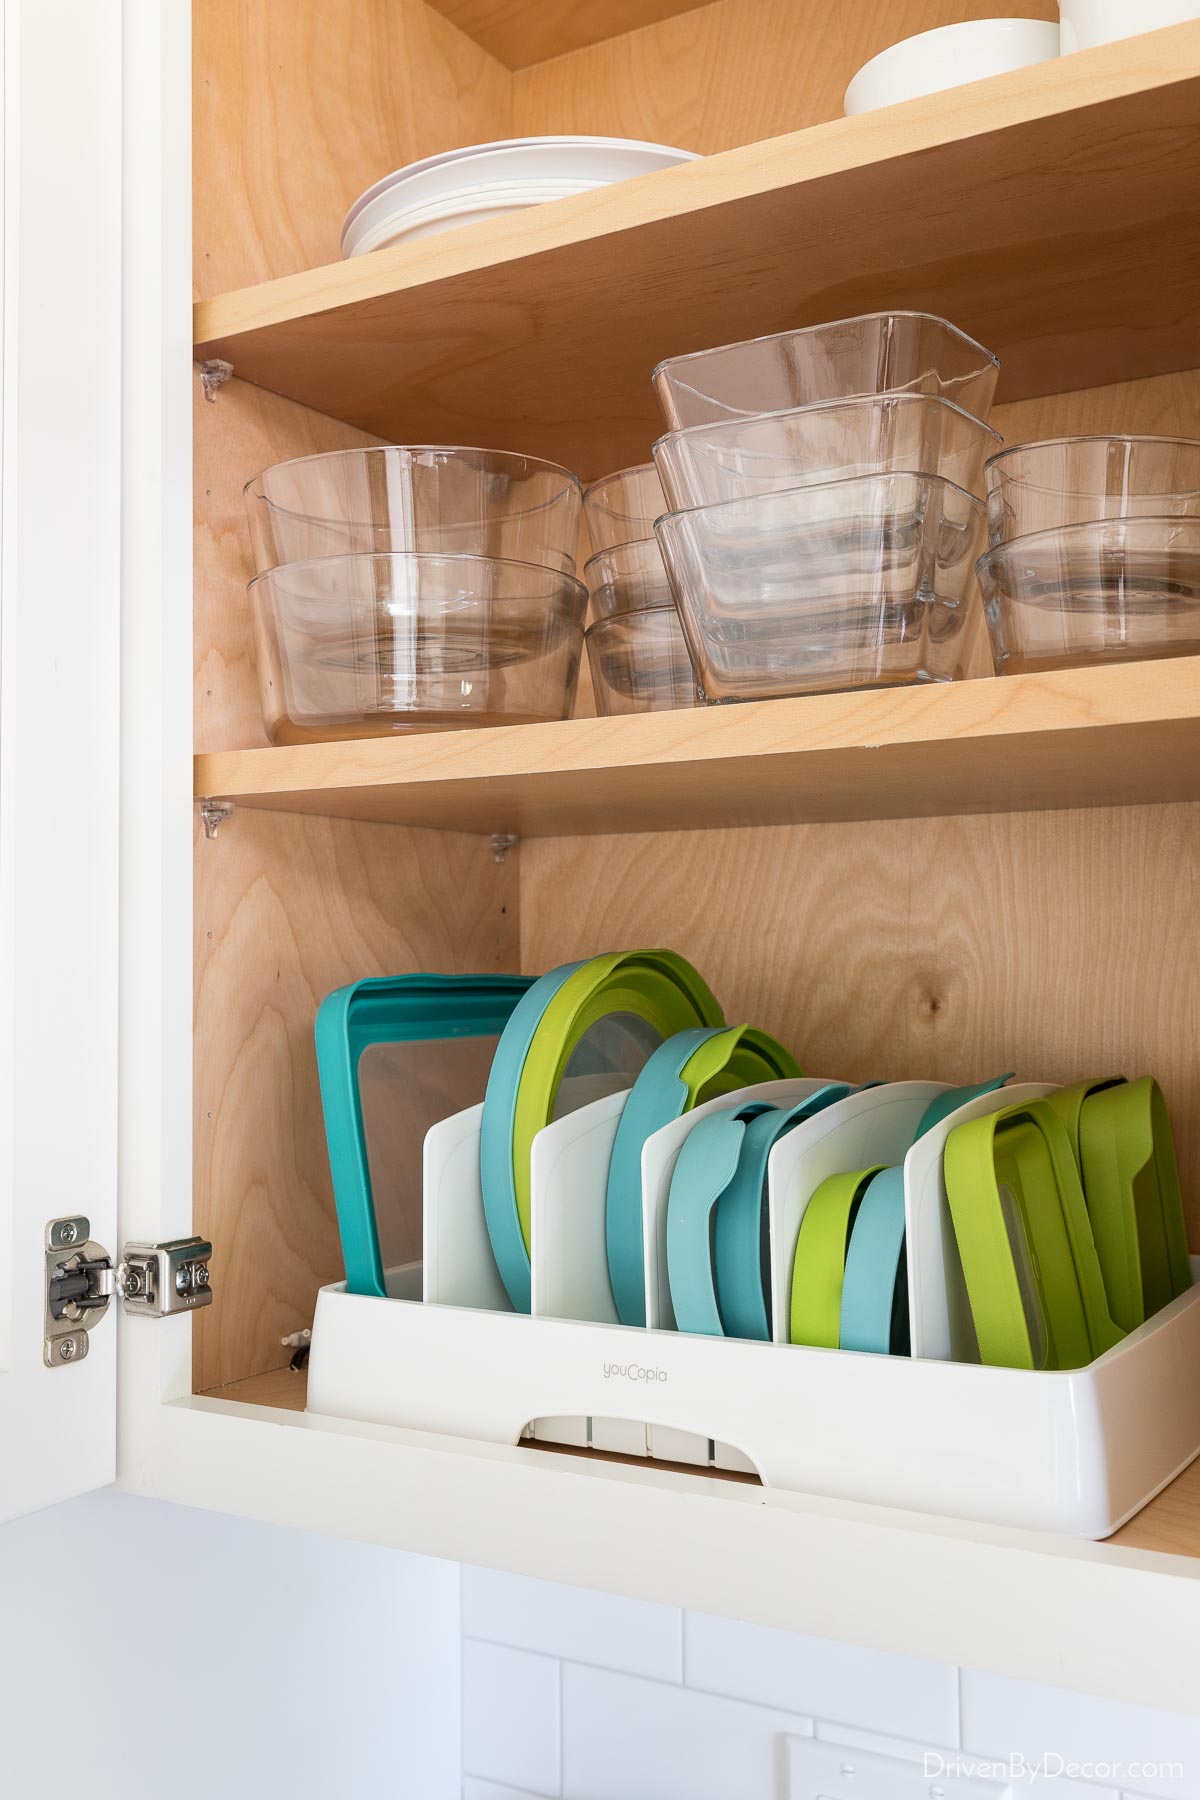 https://www.drivenbydecor.com/wp-content/uploads/2022/02/kitchen-cabinet-food-storage-containers.jpg